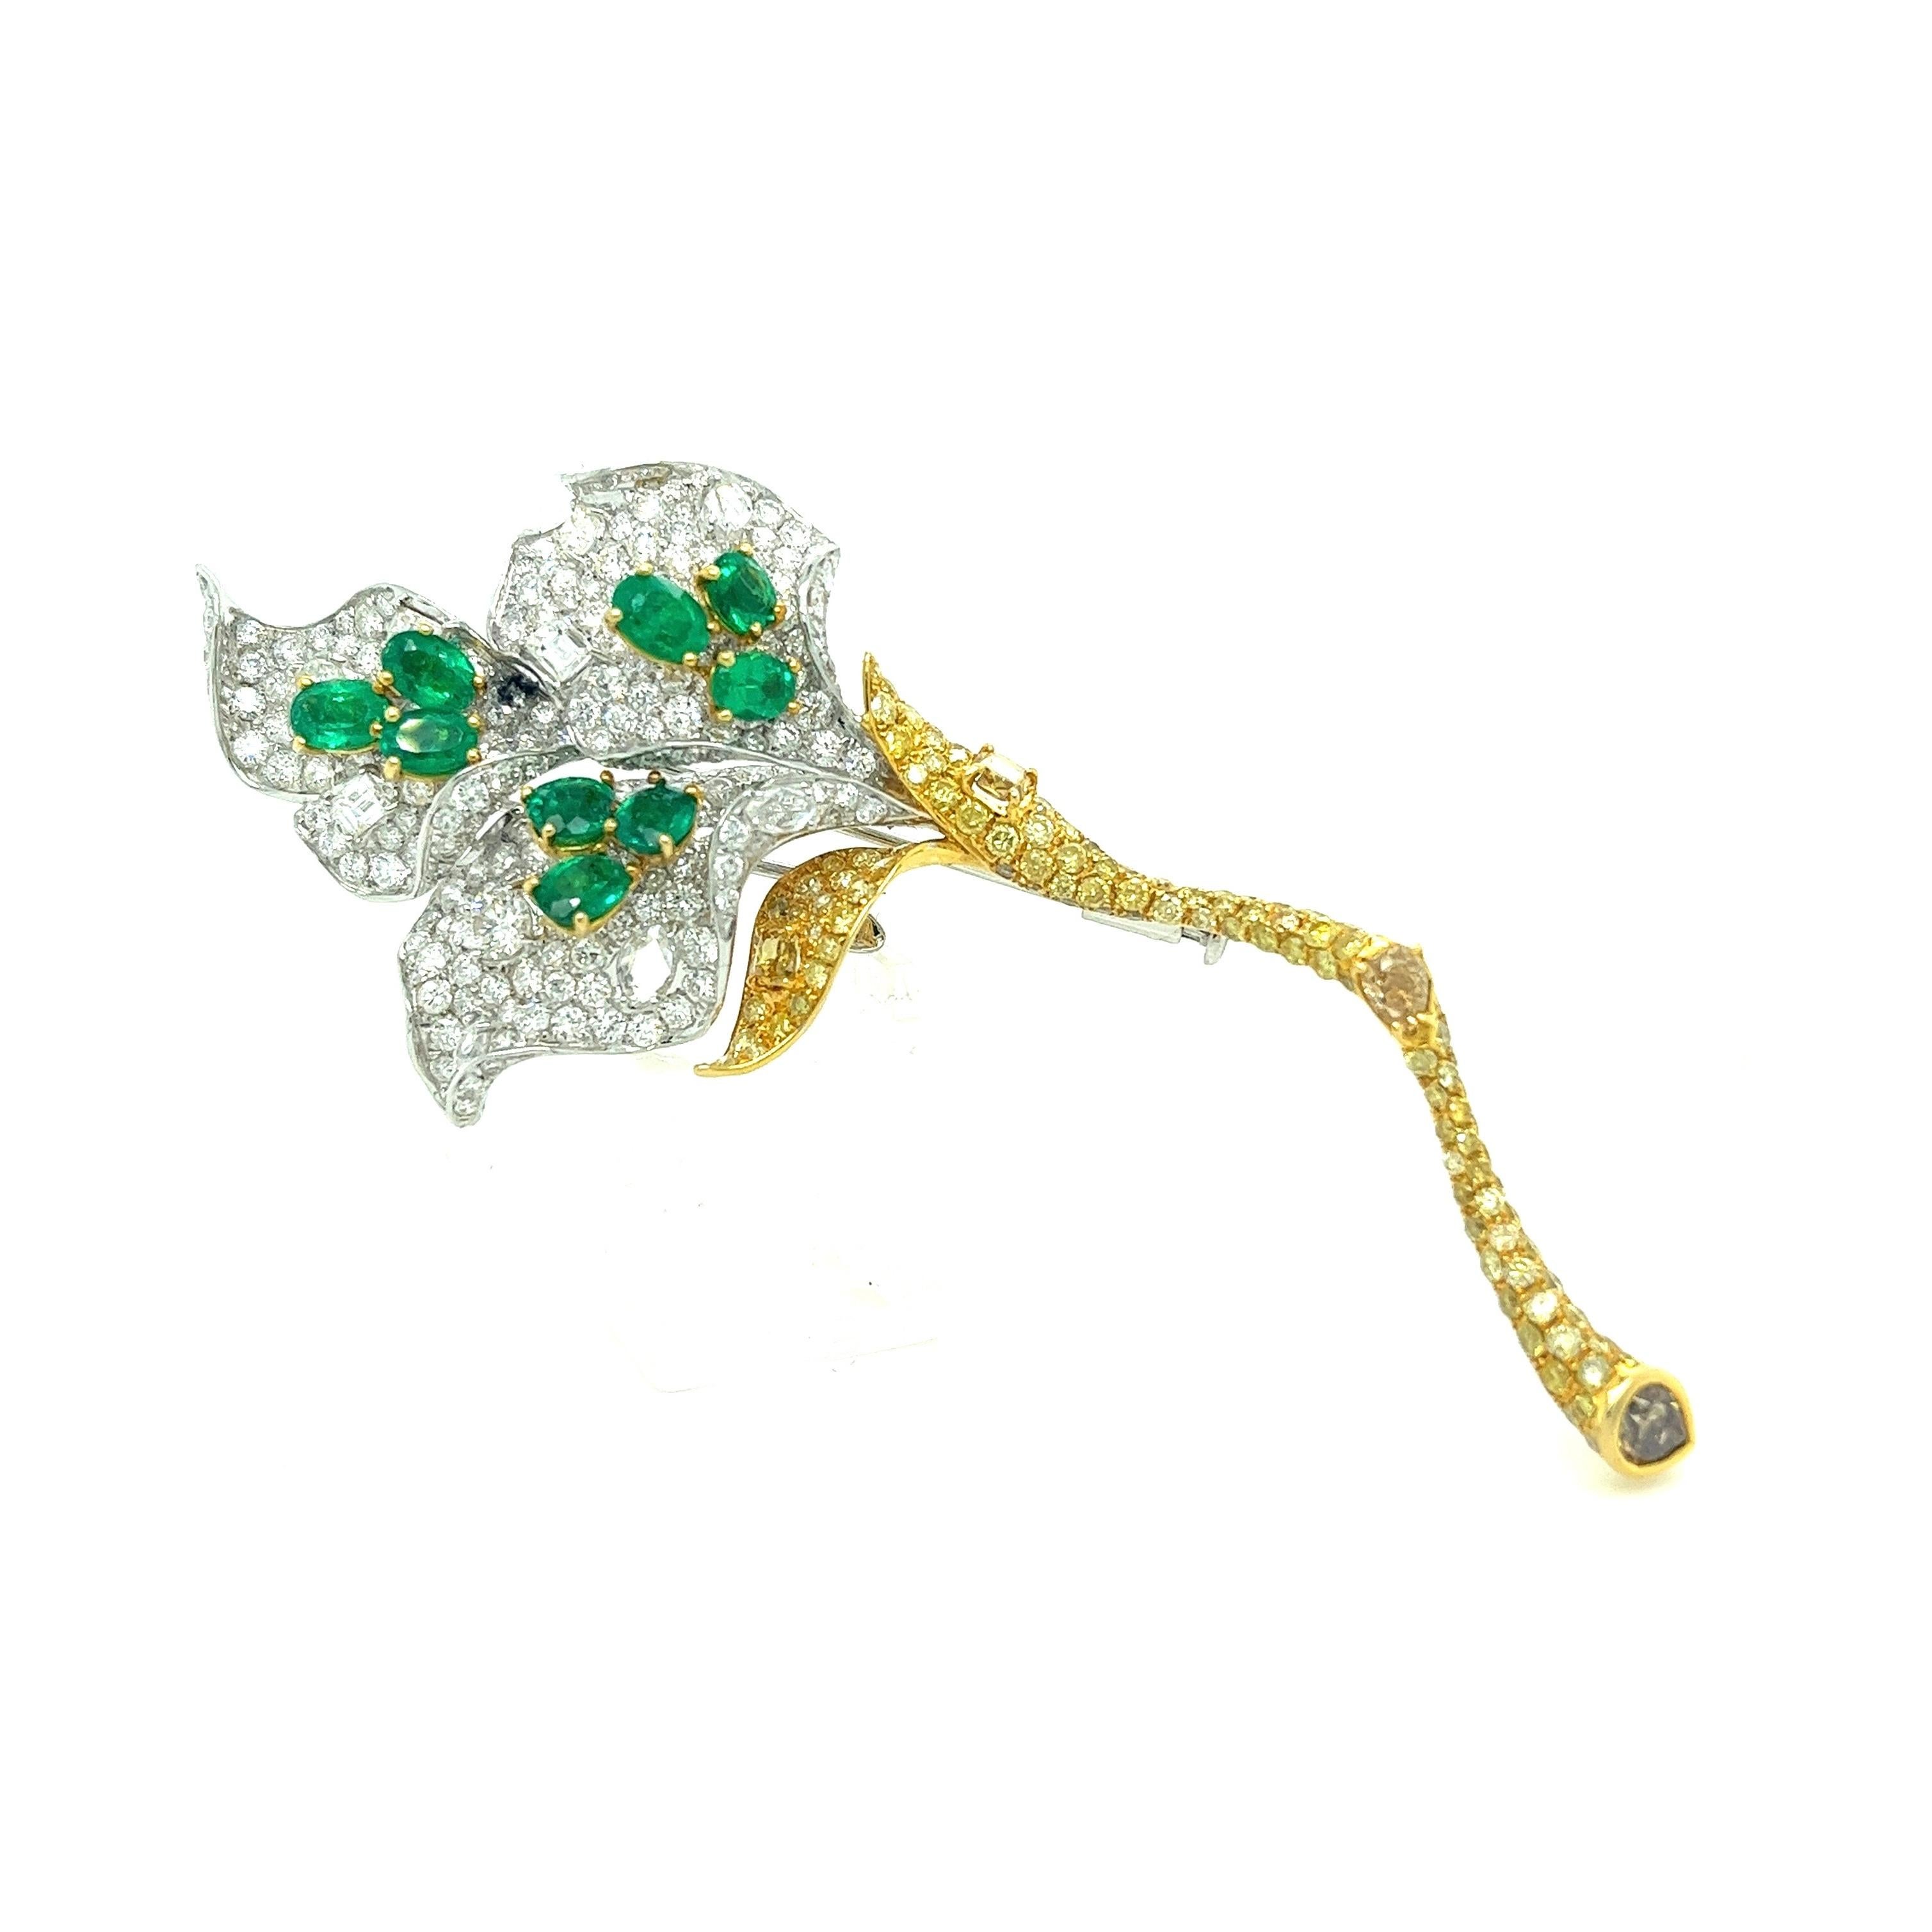 18K White Gold Emerald Flower Brooch with Diamonds & Fancy Diamonds

9 Emeralds - 2.50 CT
377 Diamonds + Fancy Diamonds - 9.03 CT
18K White Gold - 14.51 GM

Adorned with a captivating floral design, this 18k gold brooch is a true masterpiece.